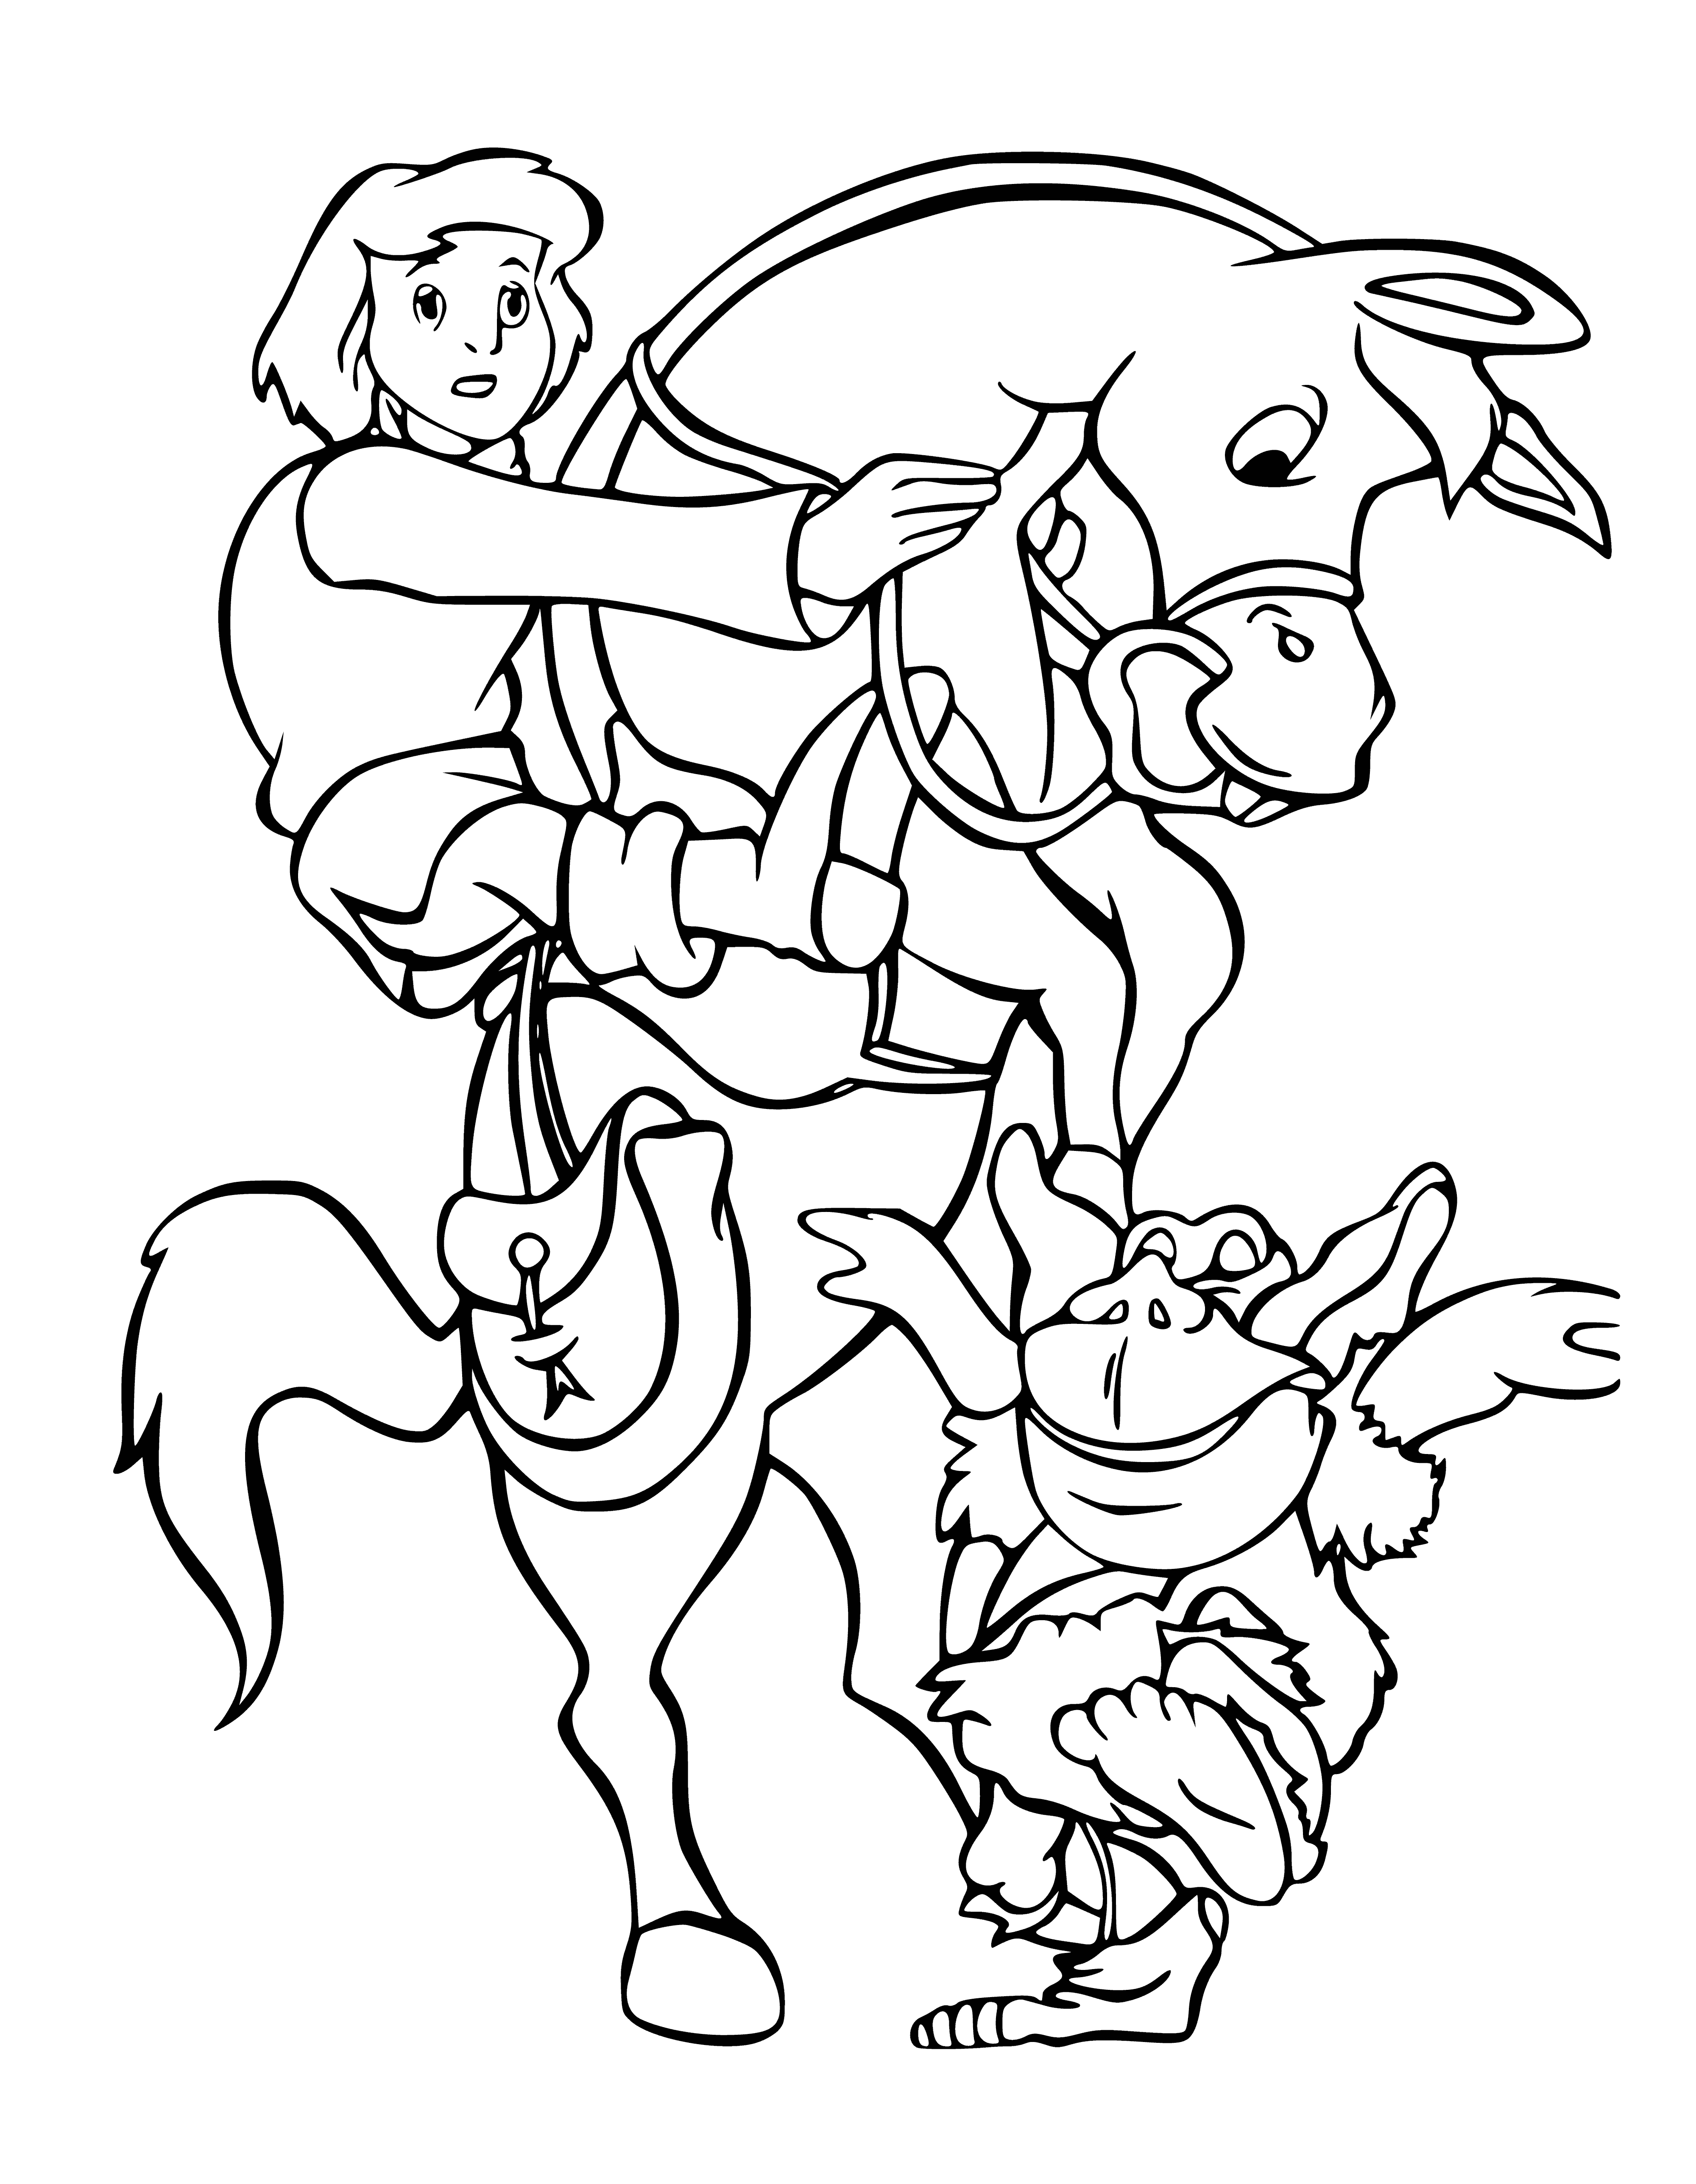 coloring page: A young boy is riding a horse through a grassy field. He has dark hair, light-colored shirt, and dark pants. The horse is brown and white and has a saddle, reins, and a brown bag. The boy is holding a long stick.